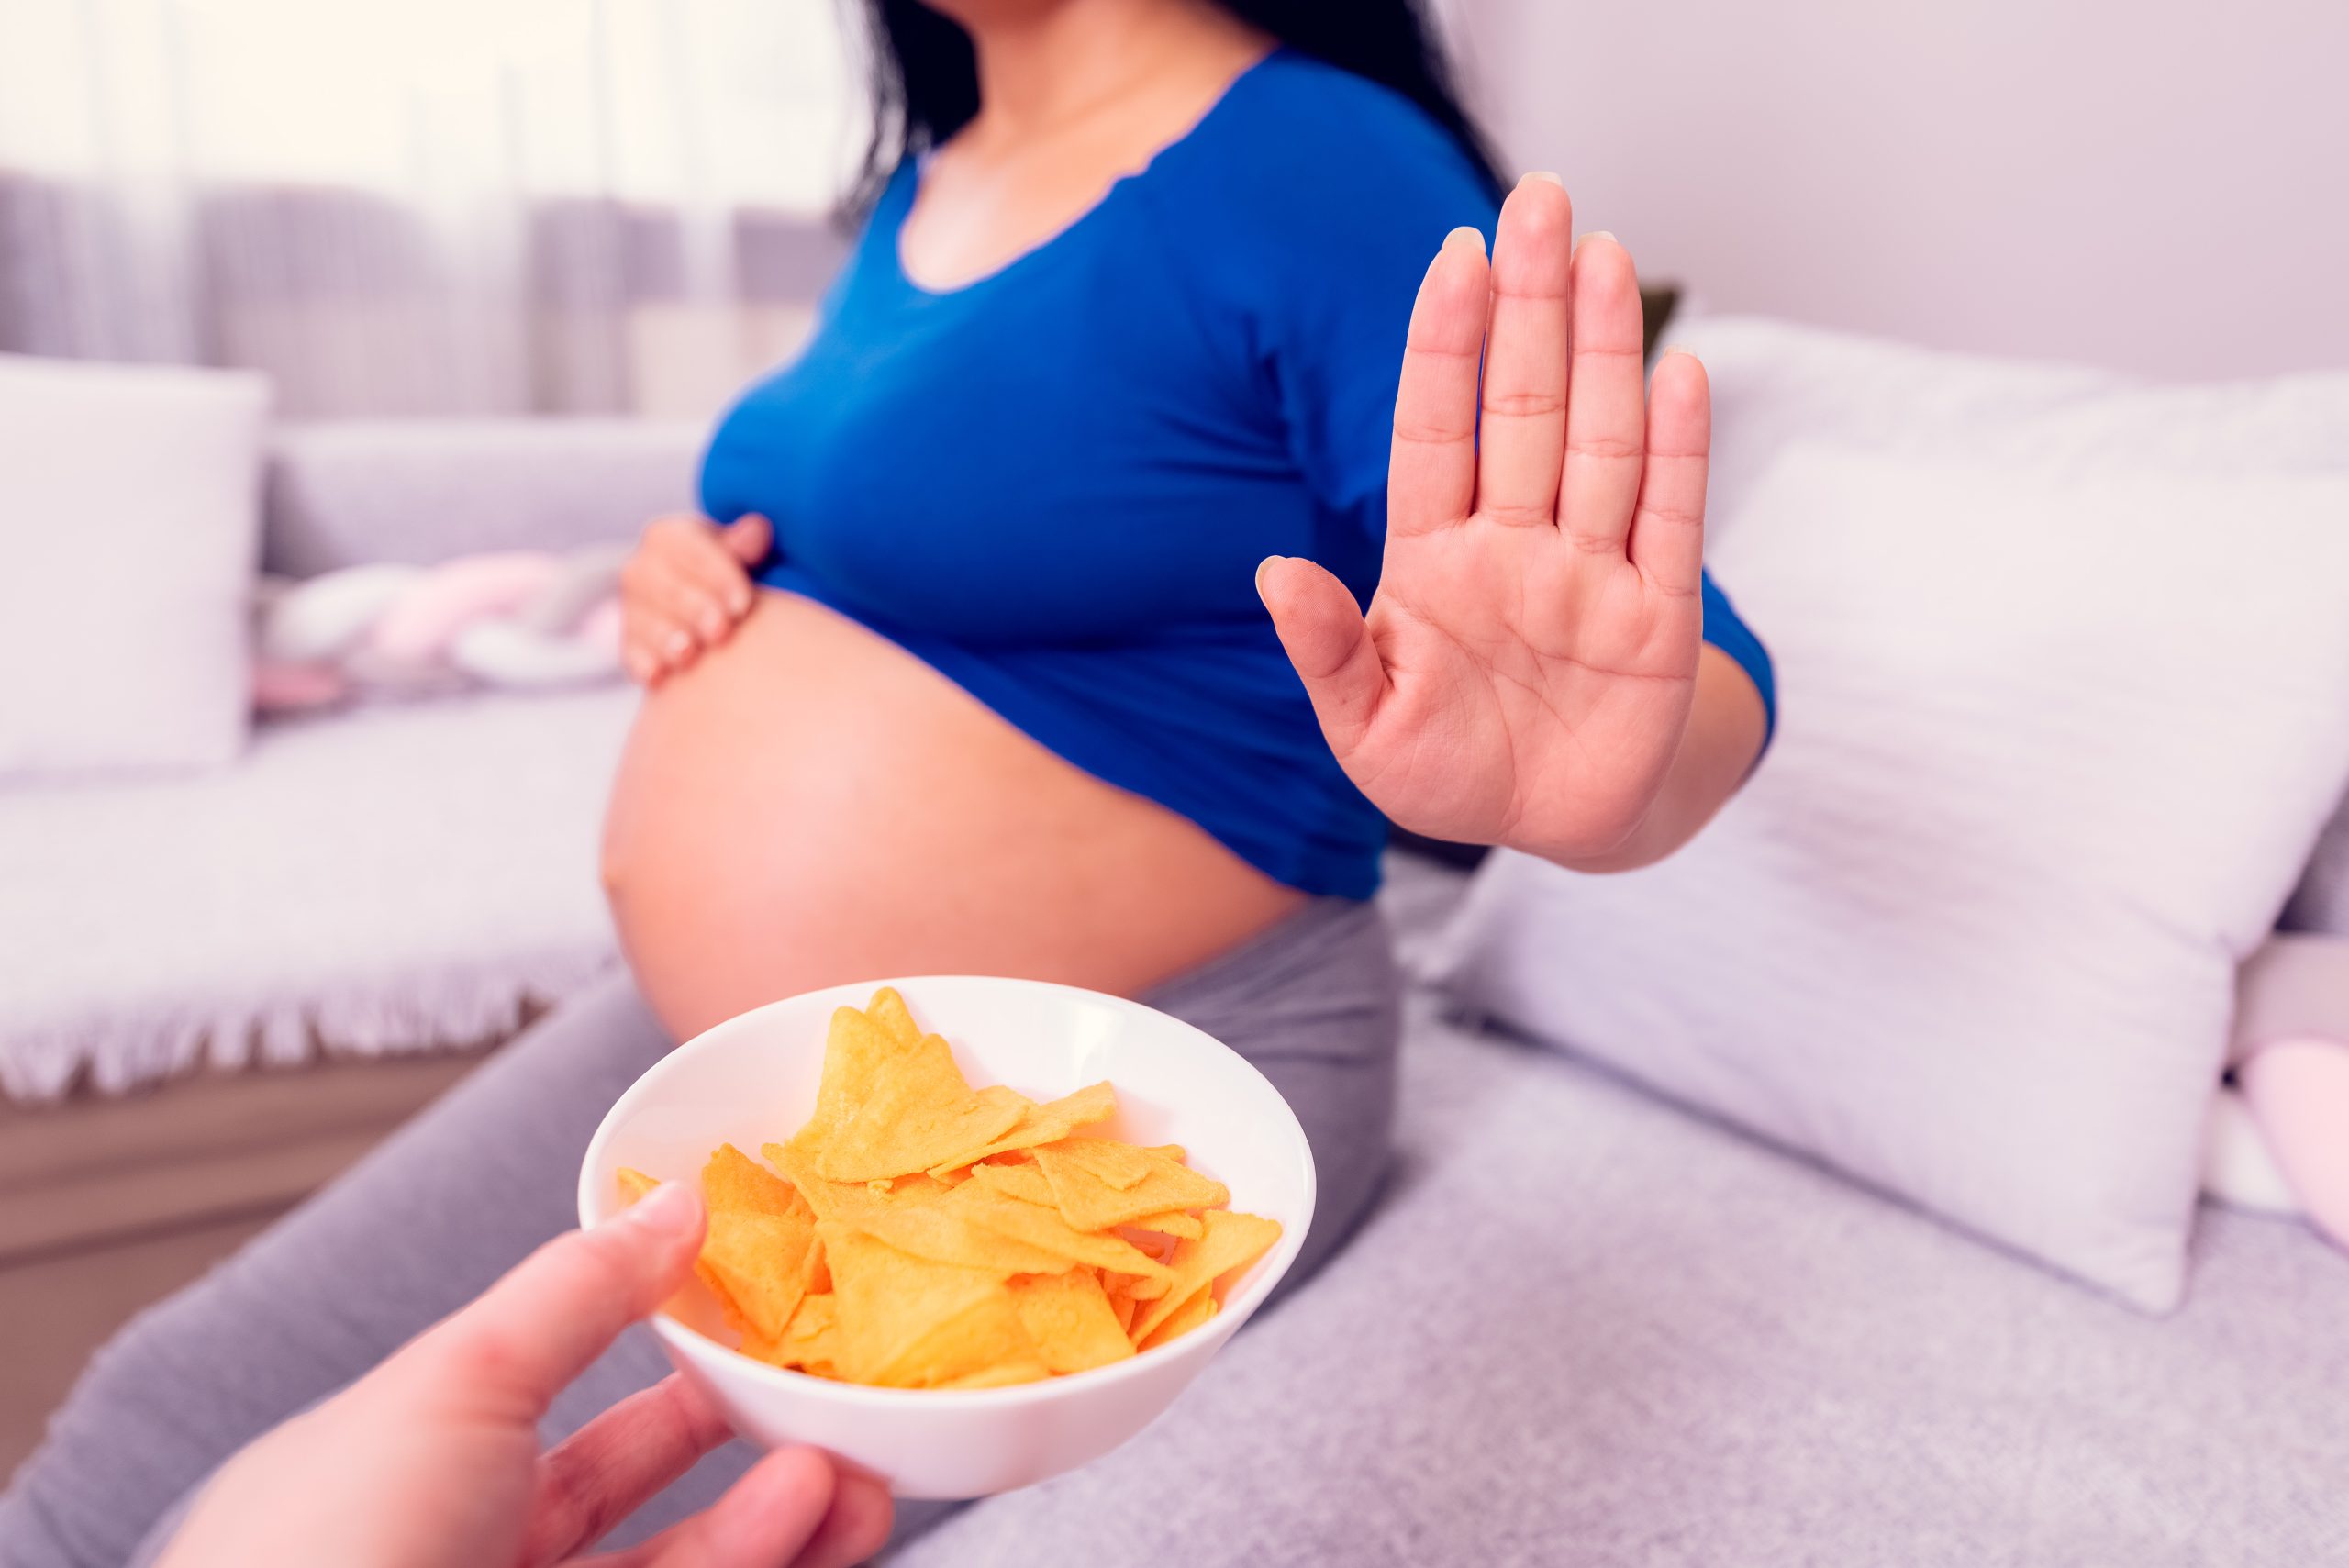 Is It Safe To Fast While Pregnant?